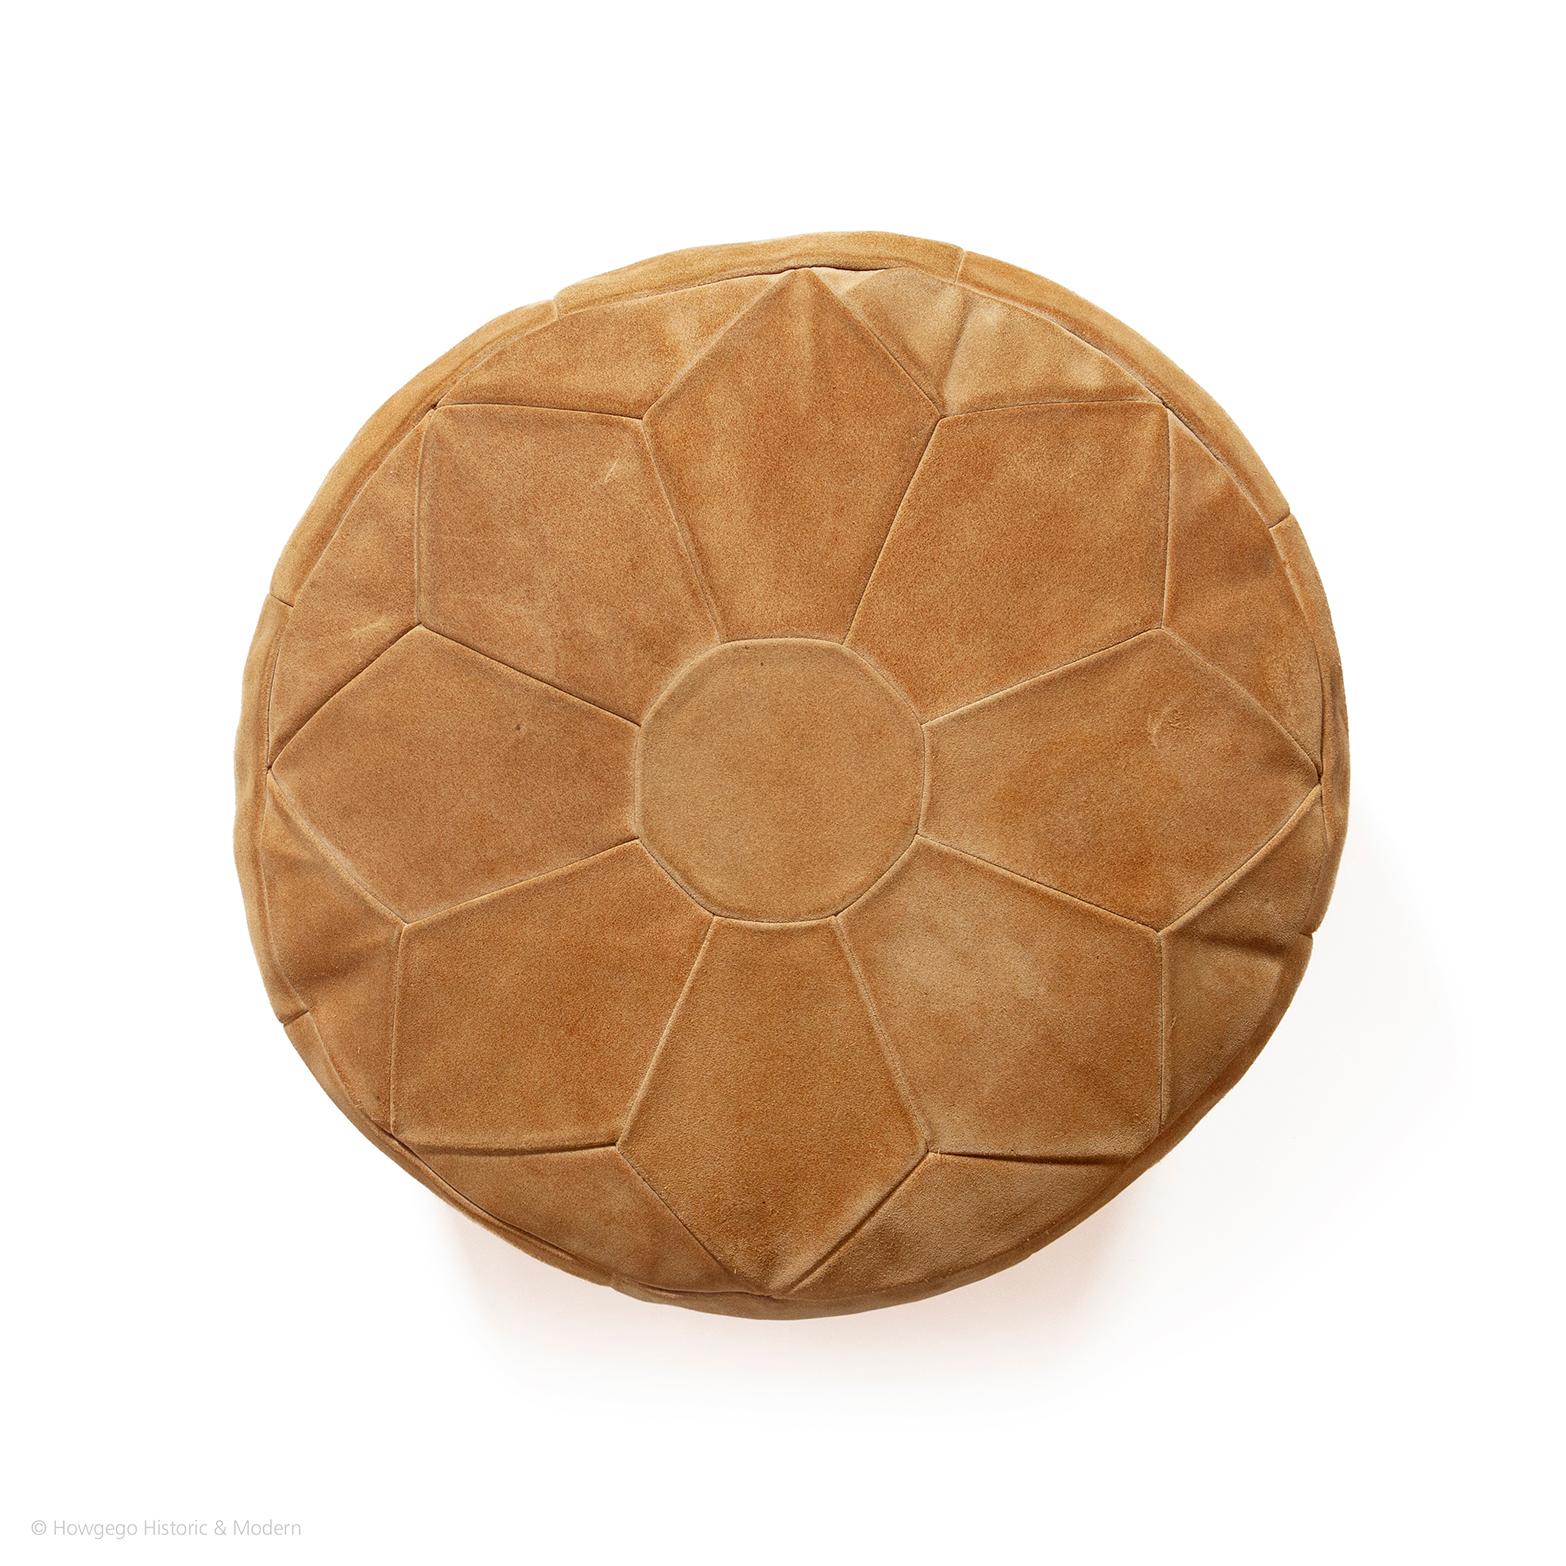 - Robust and fun Mid-Century Modern accenting piece
- Great for seating additional guests or as a footrest
- Stylish design
- Robust hard wearing suede

A vintage 1950s, pale, brown or beige, suede, small, 'barrel' pouffe. The top decorated